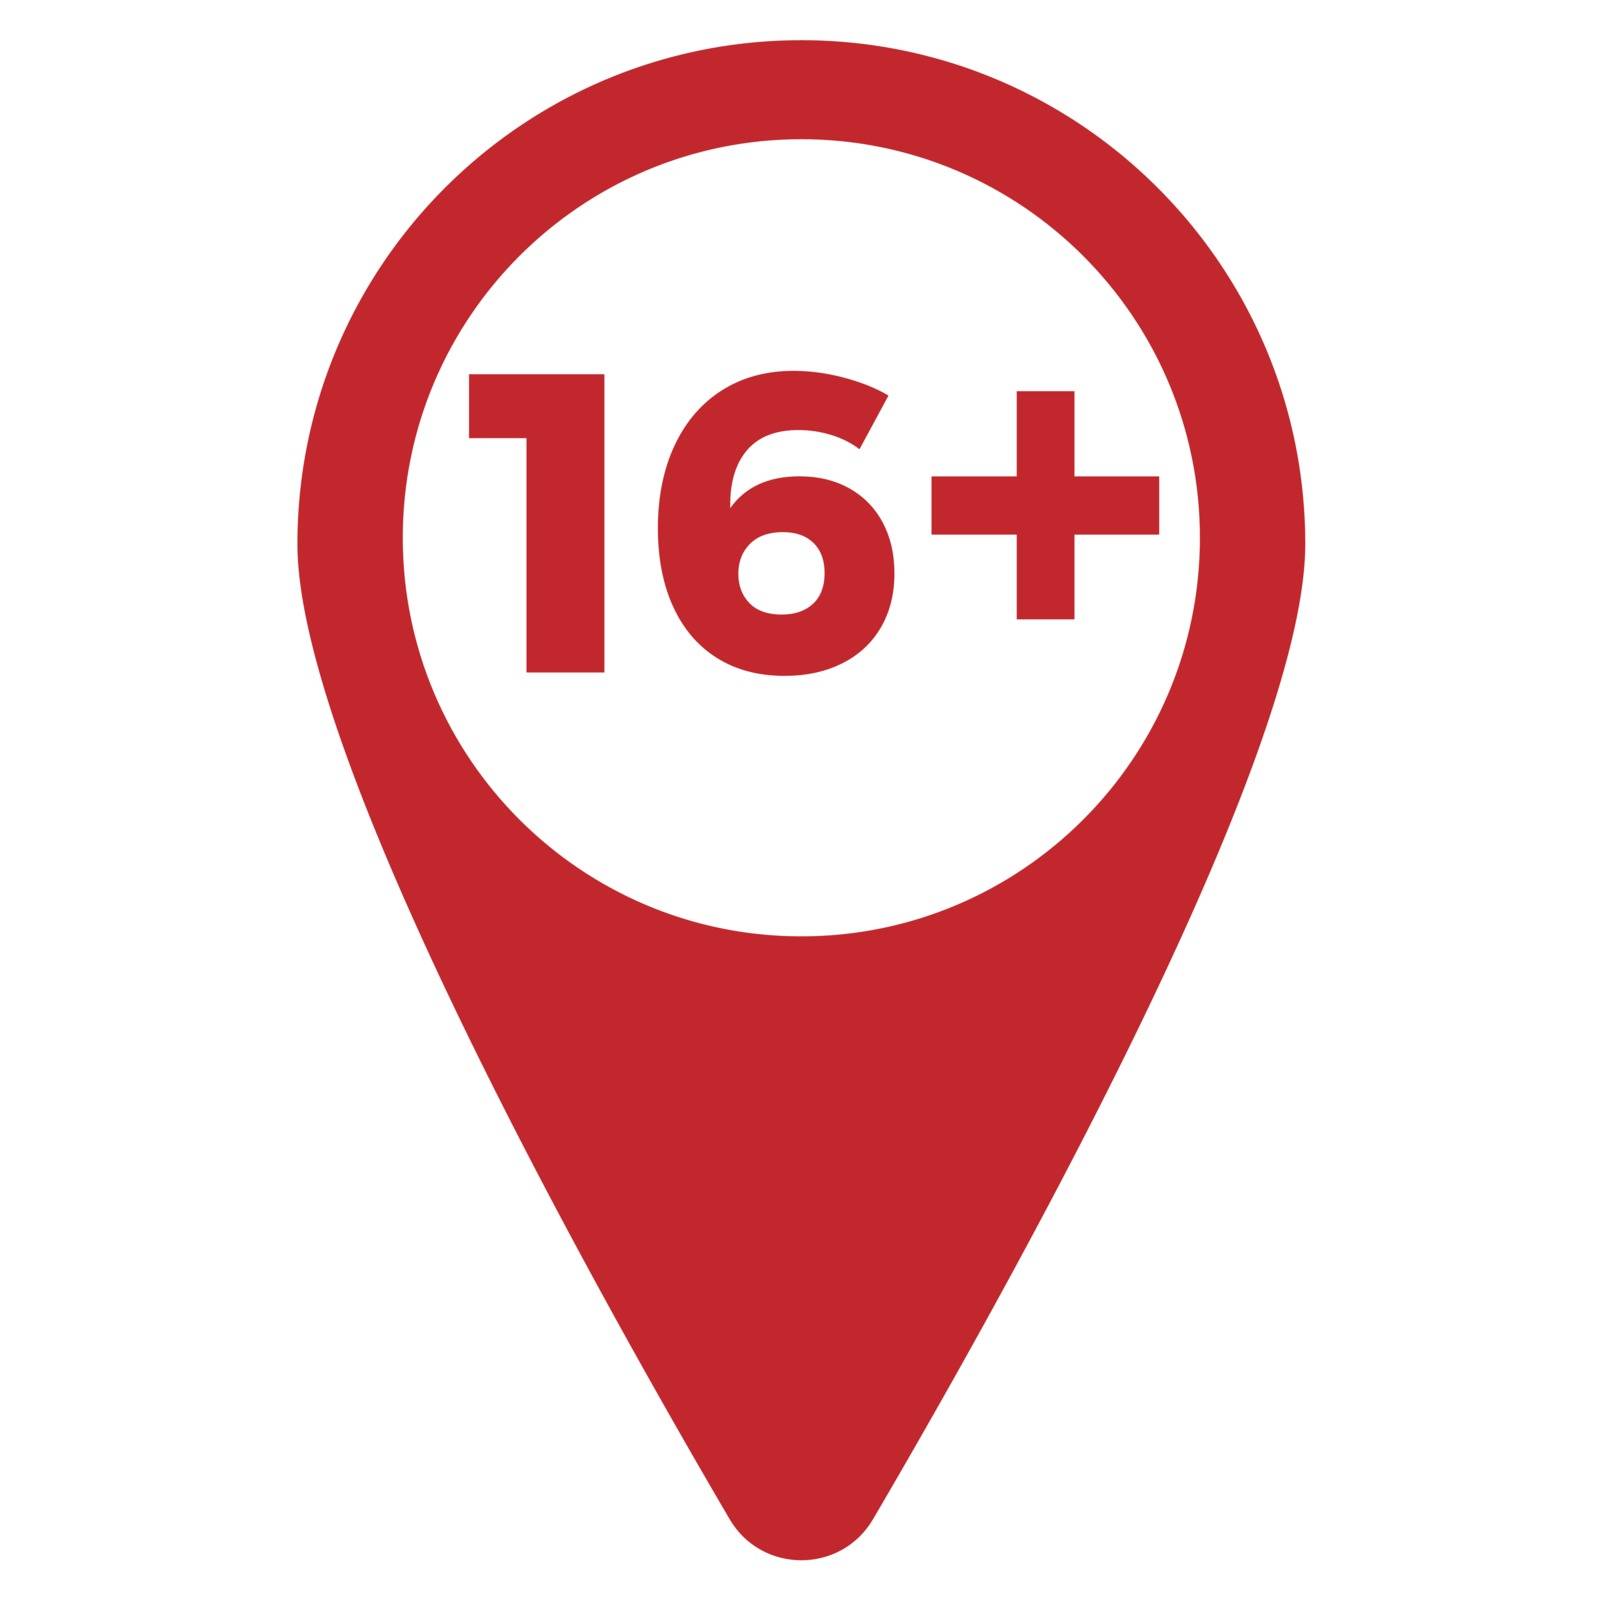 Red drop icon pointer with age limit 16 plus by Asnia